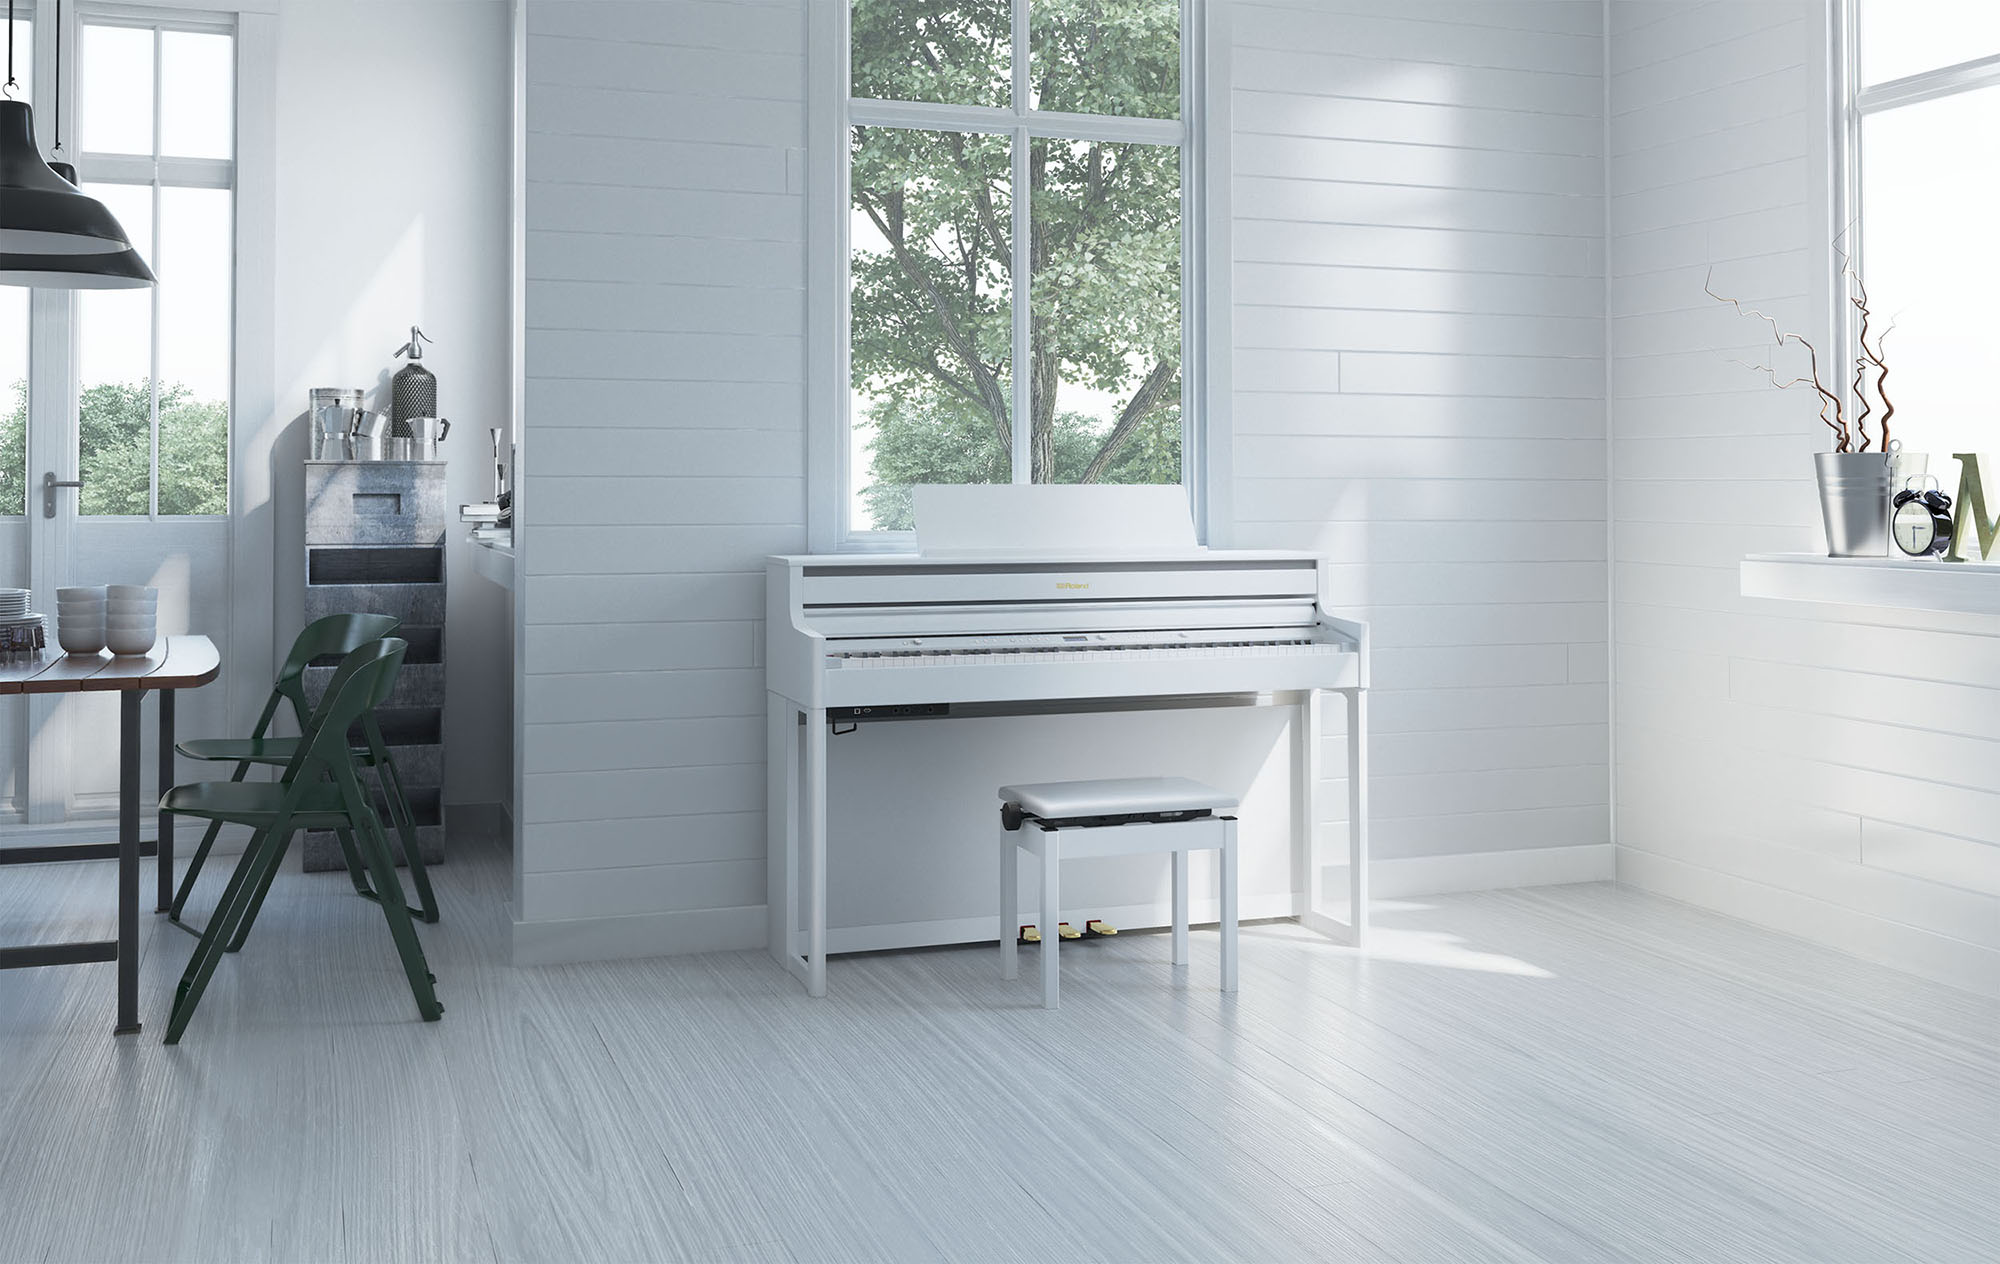 Roland Hp 702 Wh White - Piano digital con mueble - Variation 1